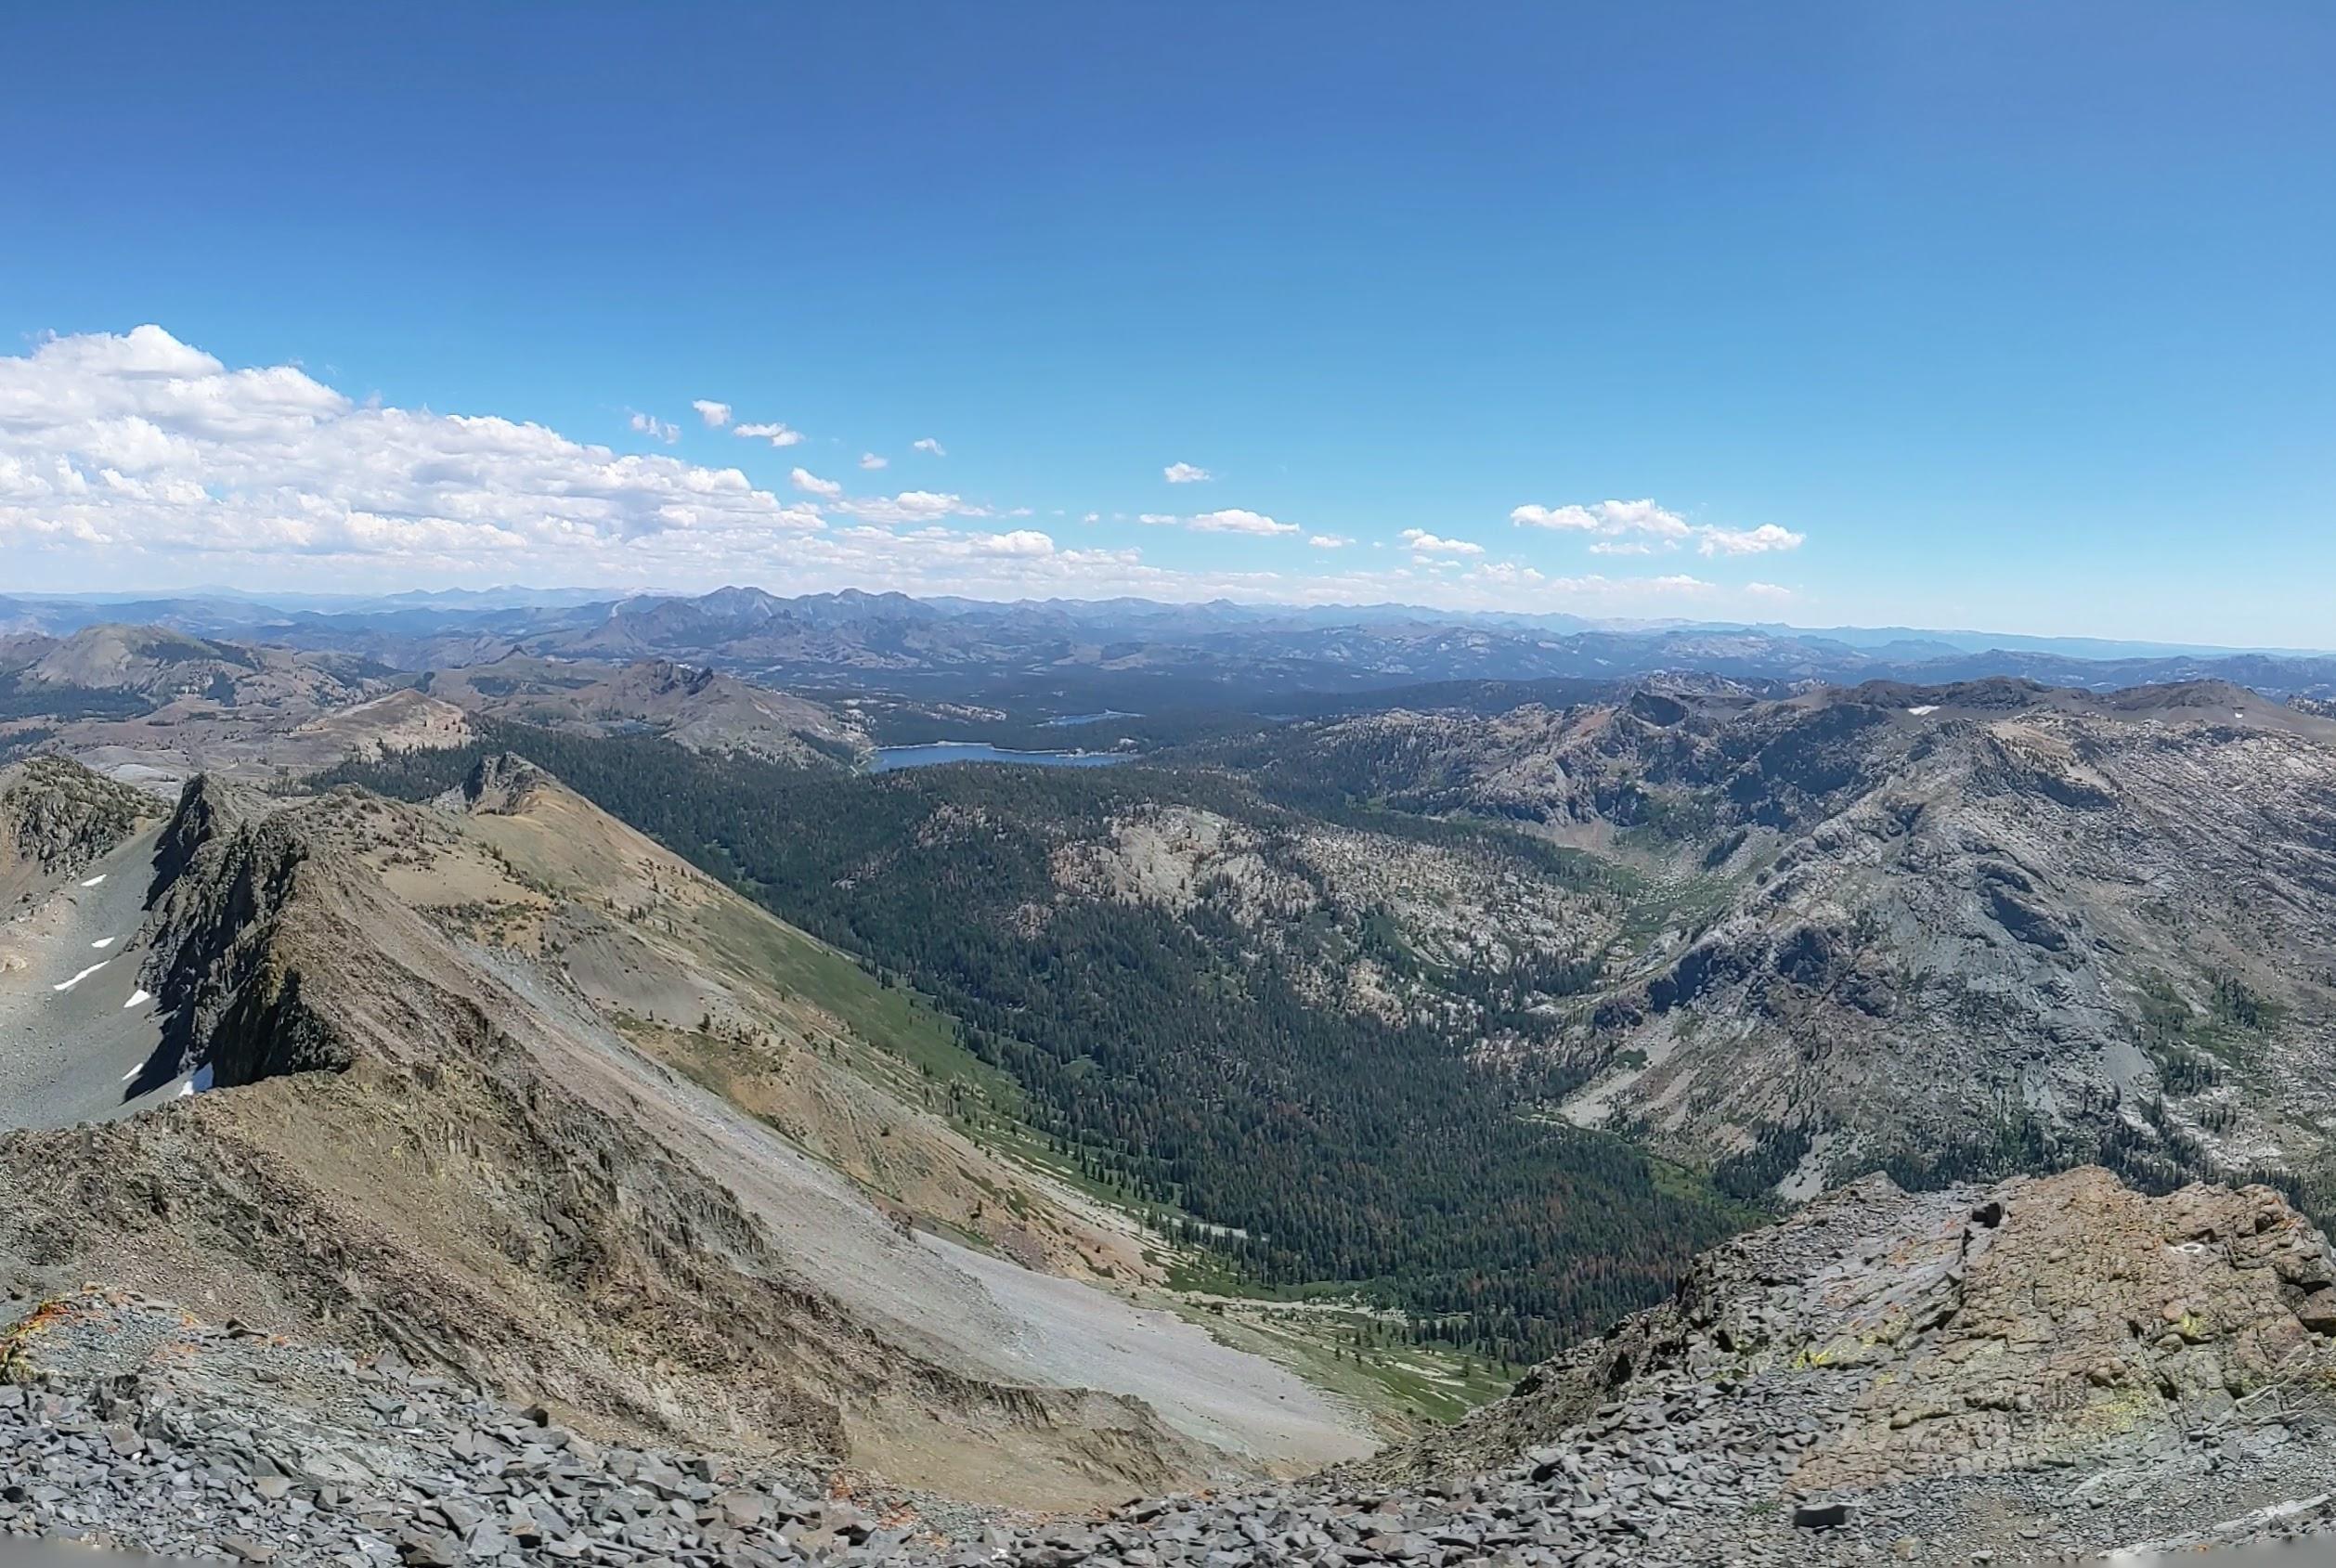 Summit view toward South East, Upper Blue Lake